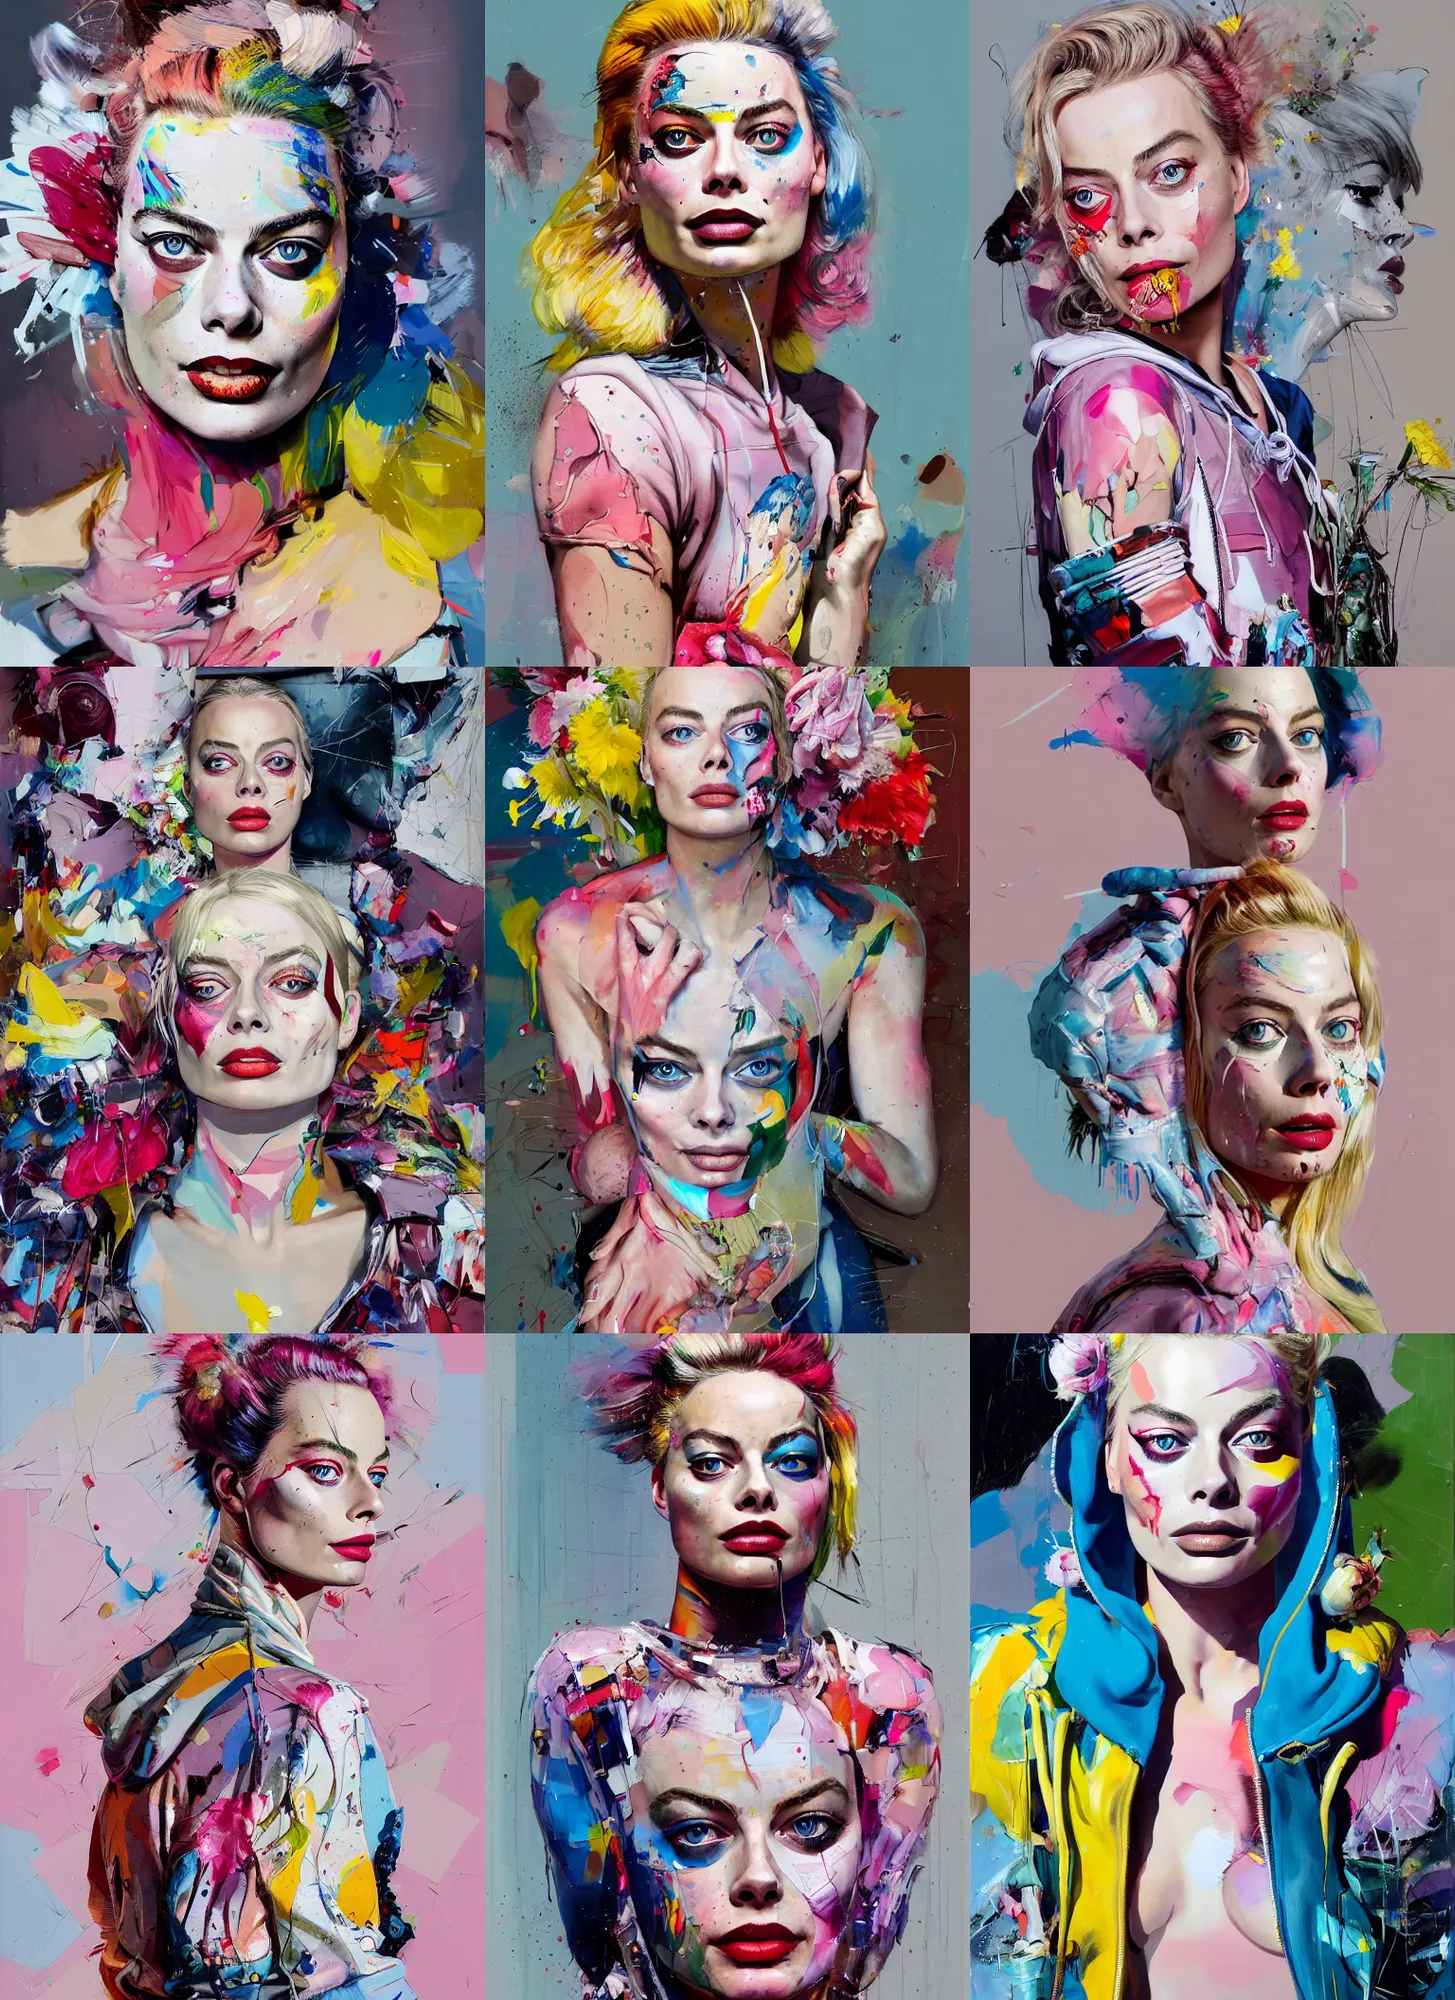 Prompt: margot robbie in the style of martine johanna and! jenny saville!, wearing a hoodie, standing in a township street, street fashion outfit, haute couture fashion shoot, mascara, full figure painting by john berkey, david choe, ismail inceoglu, decorative flowers, 2 4 mm, die antwoord ( yolandi visser )